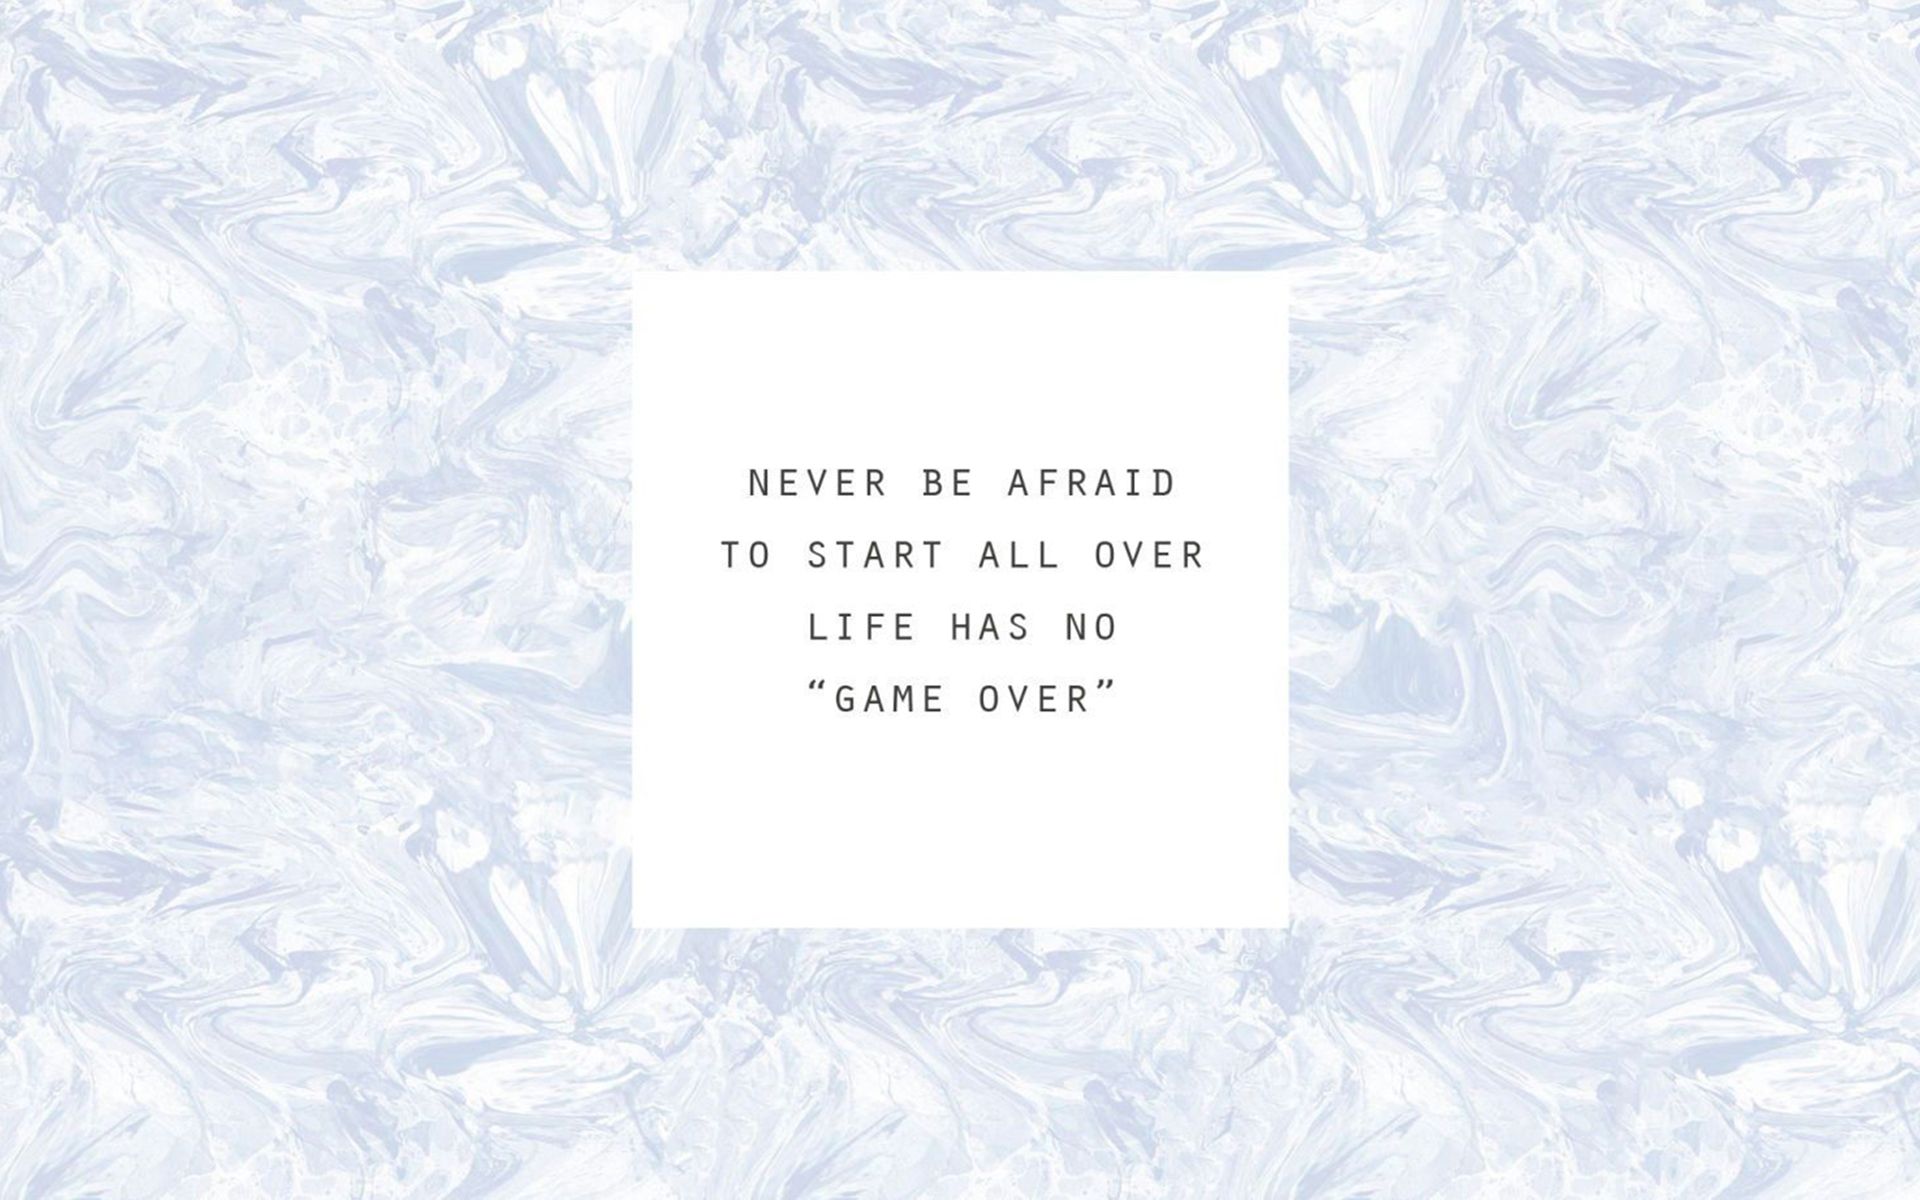 Never be afraid to start all over. Life has no game over. - Marble